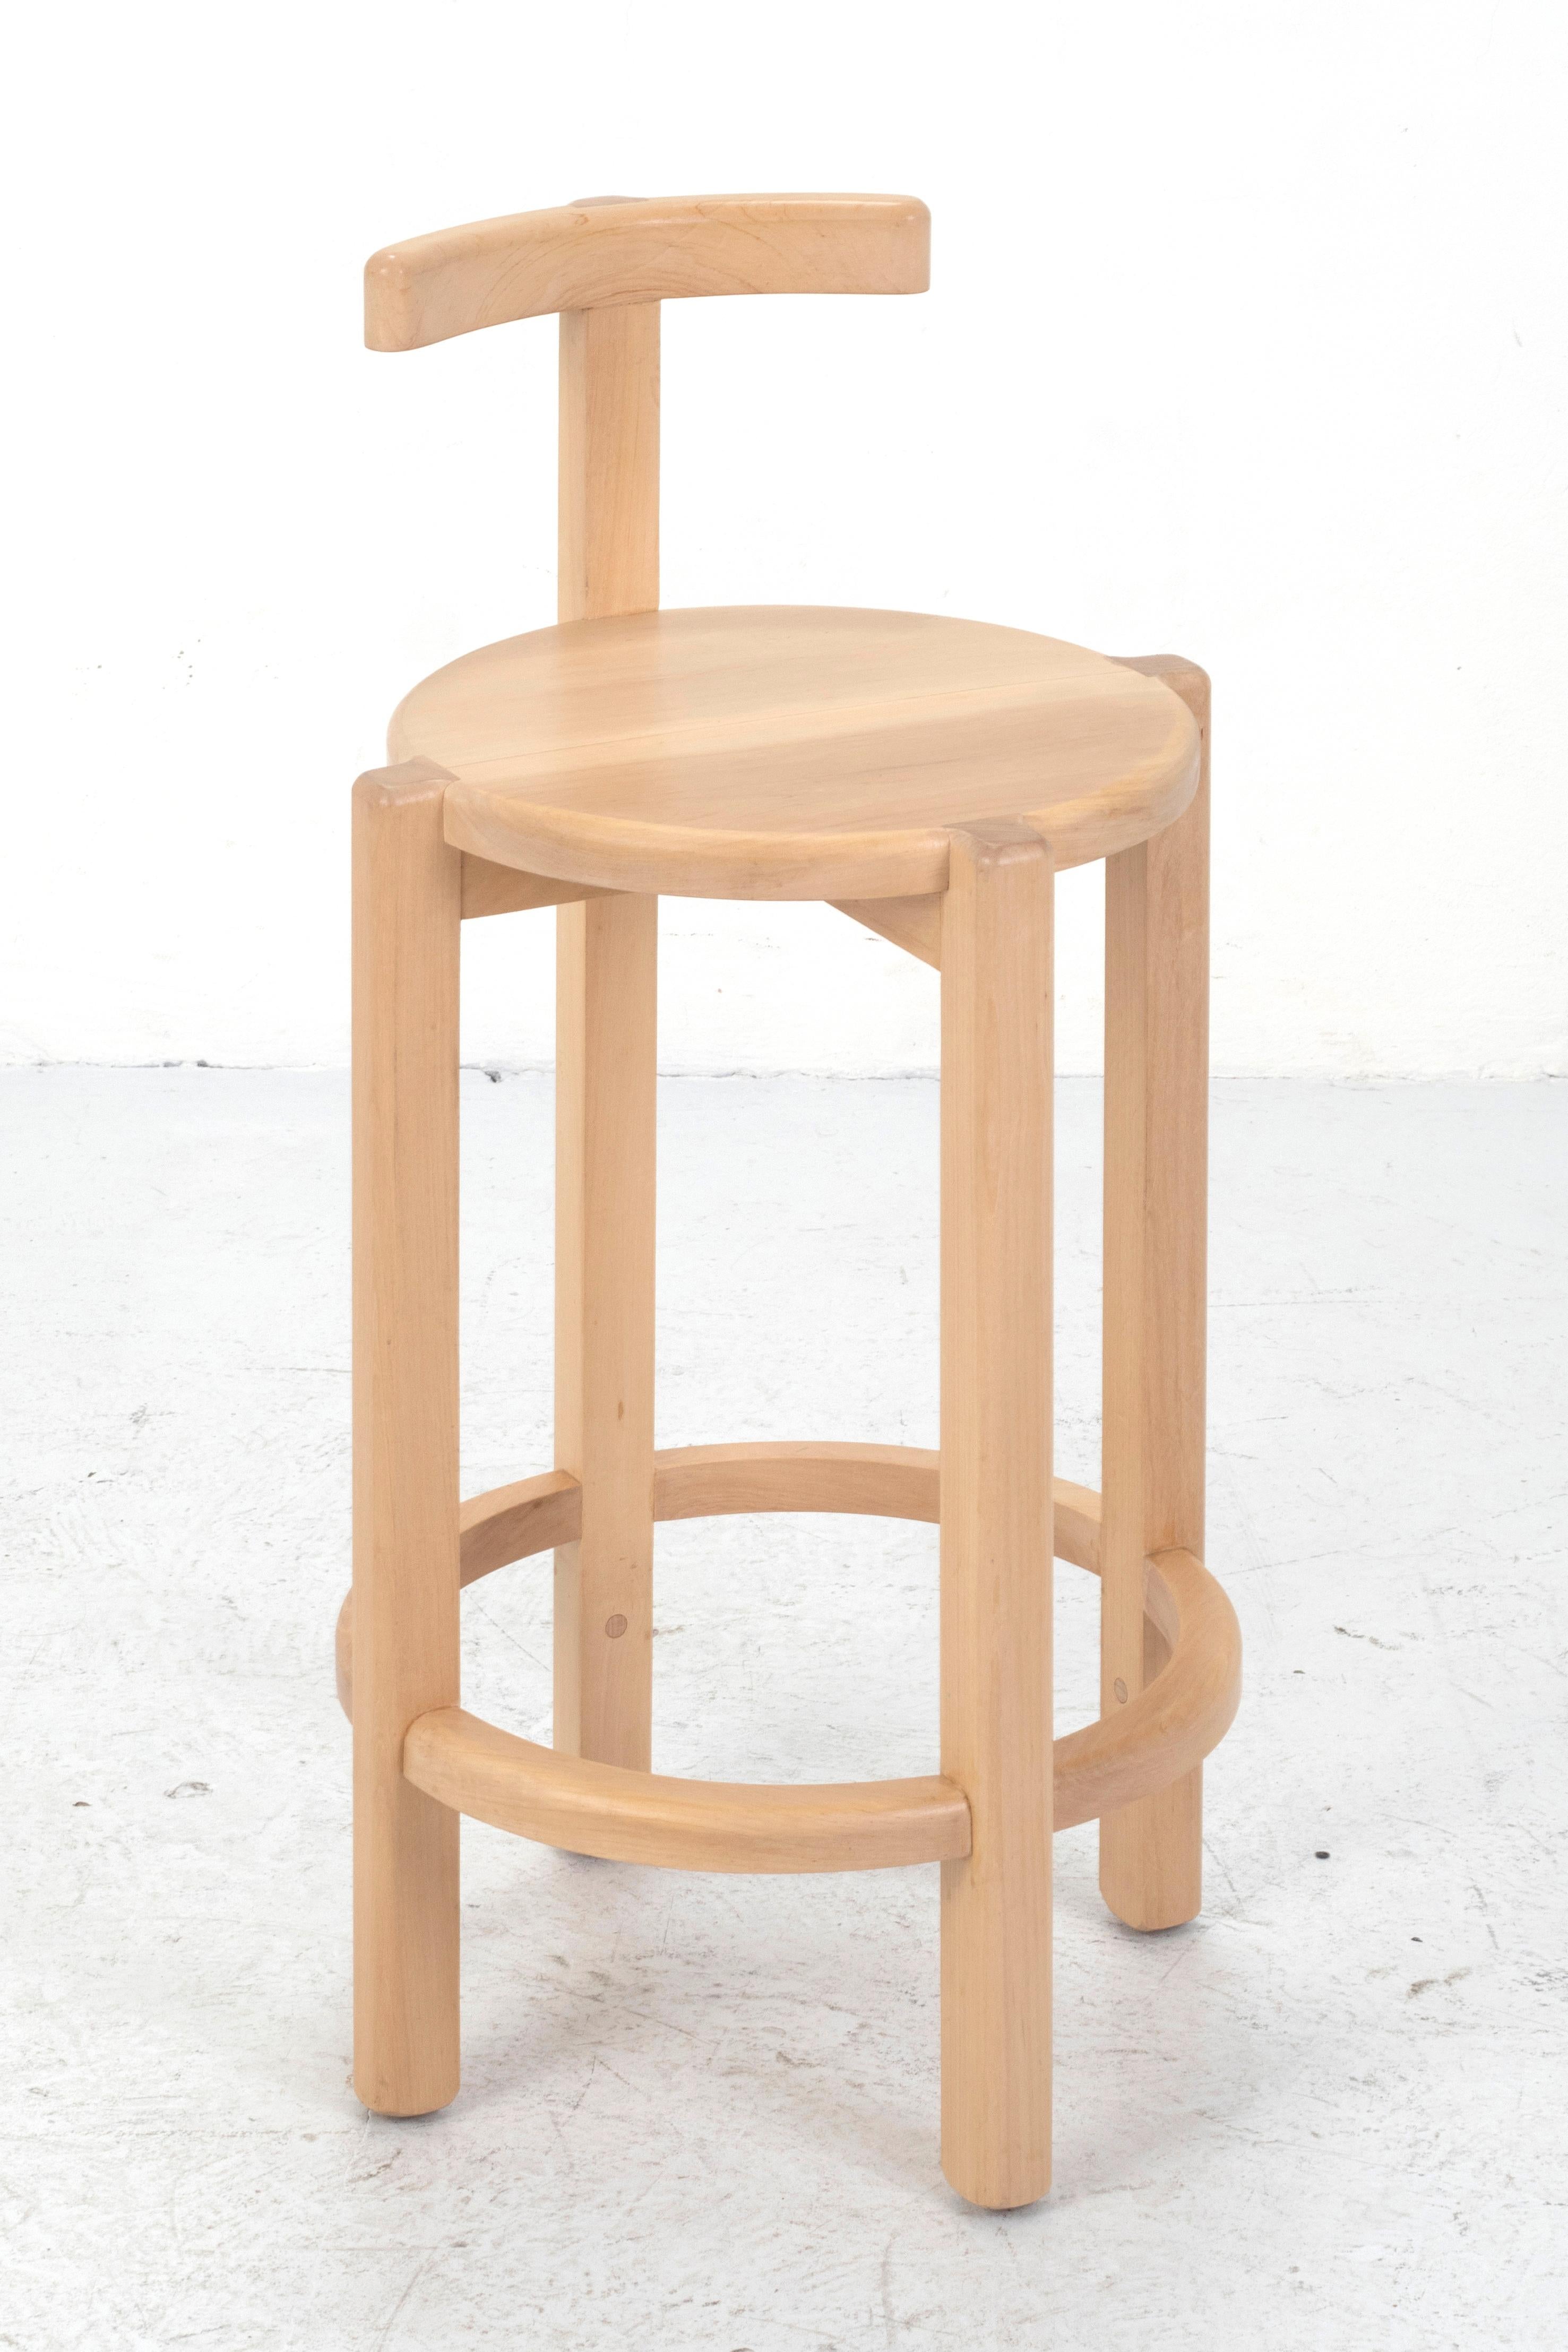 Orno bar stool by Ries
Dimensions: D44 x H86 cm 
Materials: Hardwood
Transparent matte lacquer, color matte lacquer (Finishings)

Ries is a design studio based in Buenos Aires, Argentina, focused on product and conemporary furniture design. The